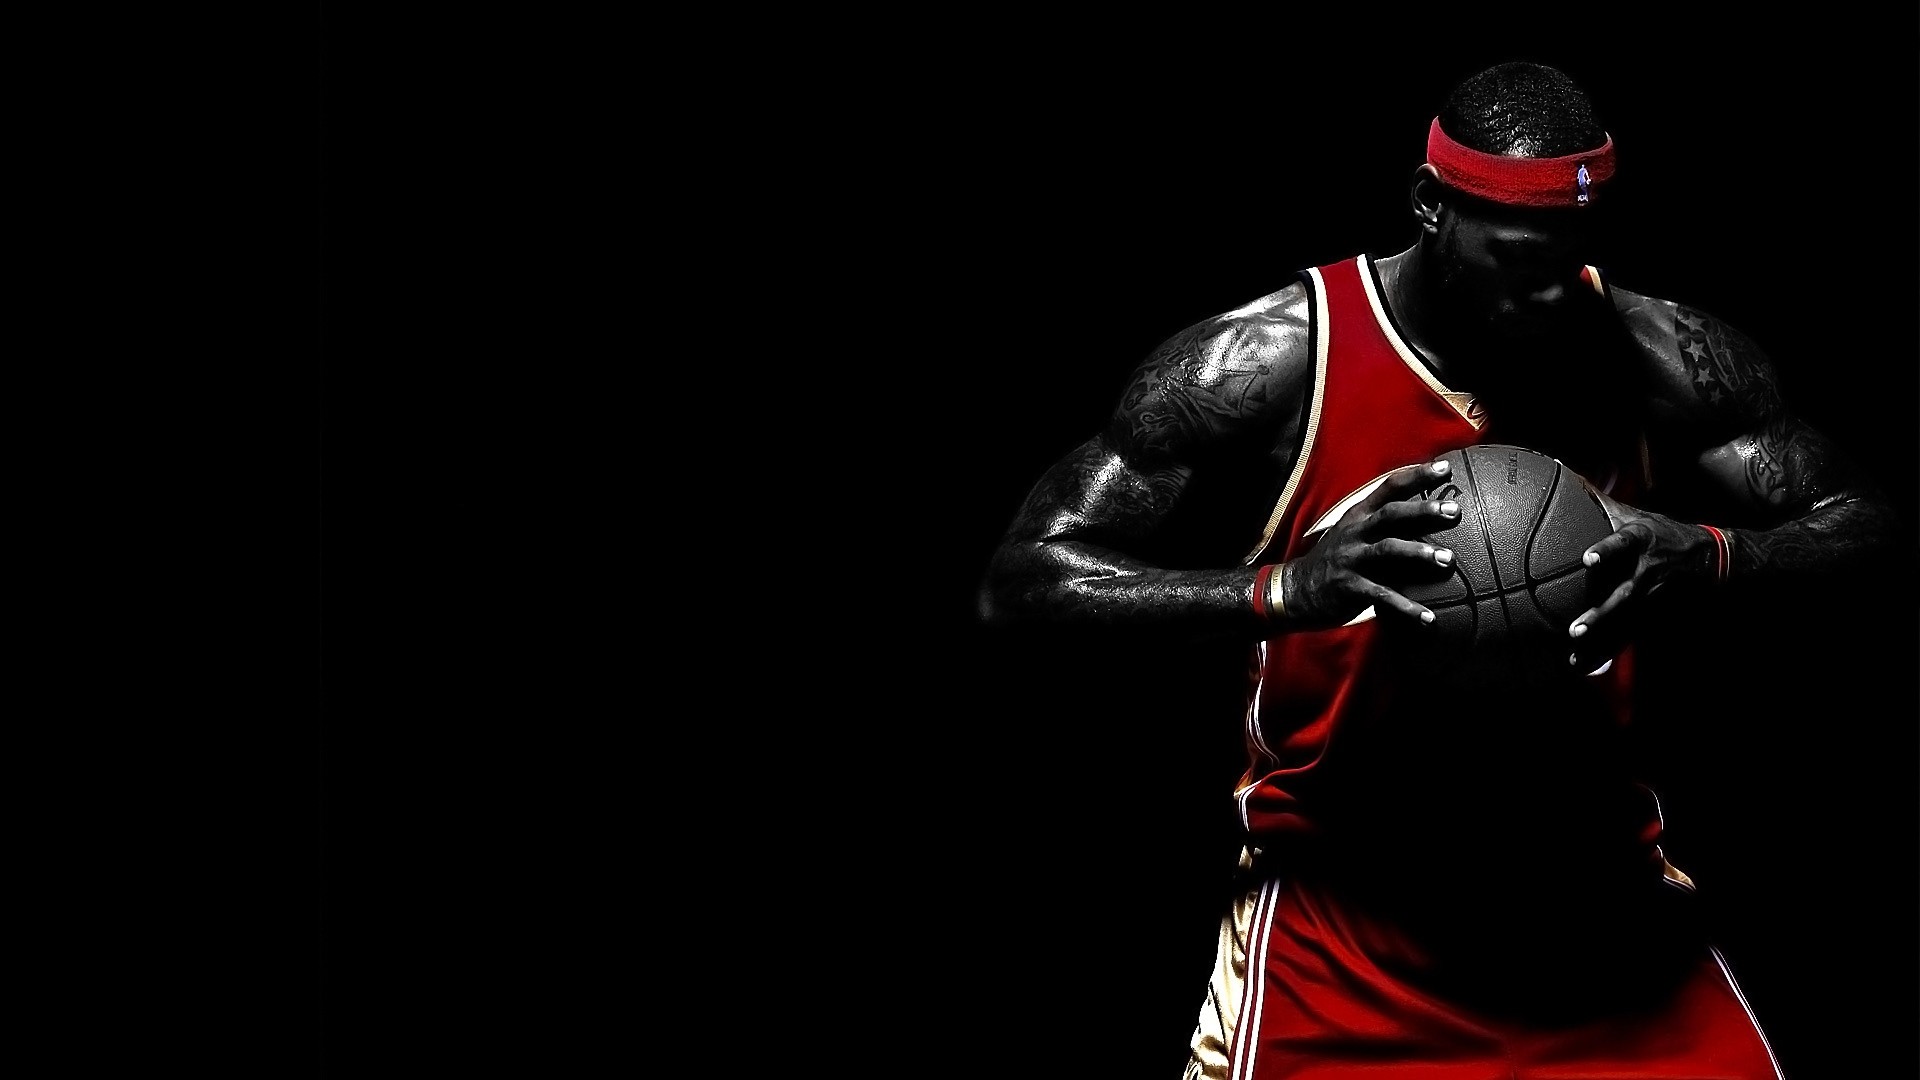 1920x1080 Awesome Basketball Wallpapers HD 